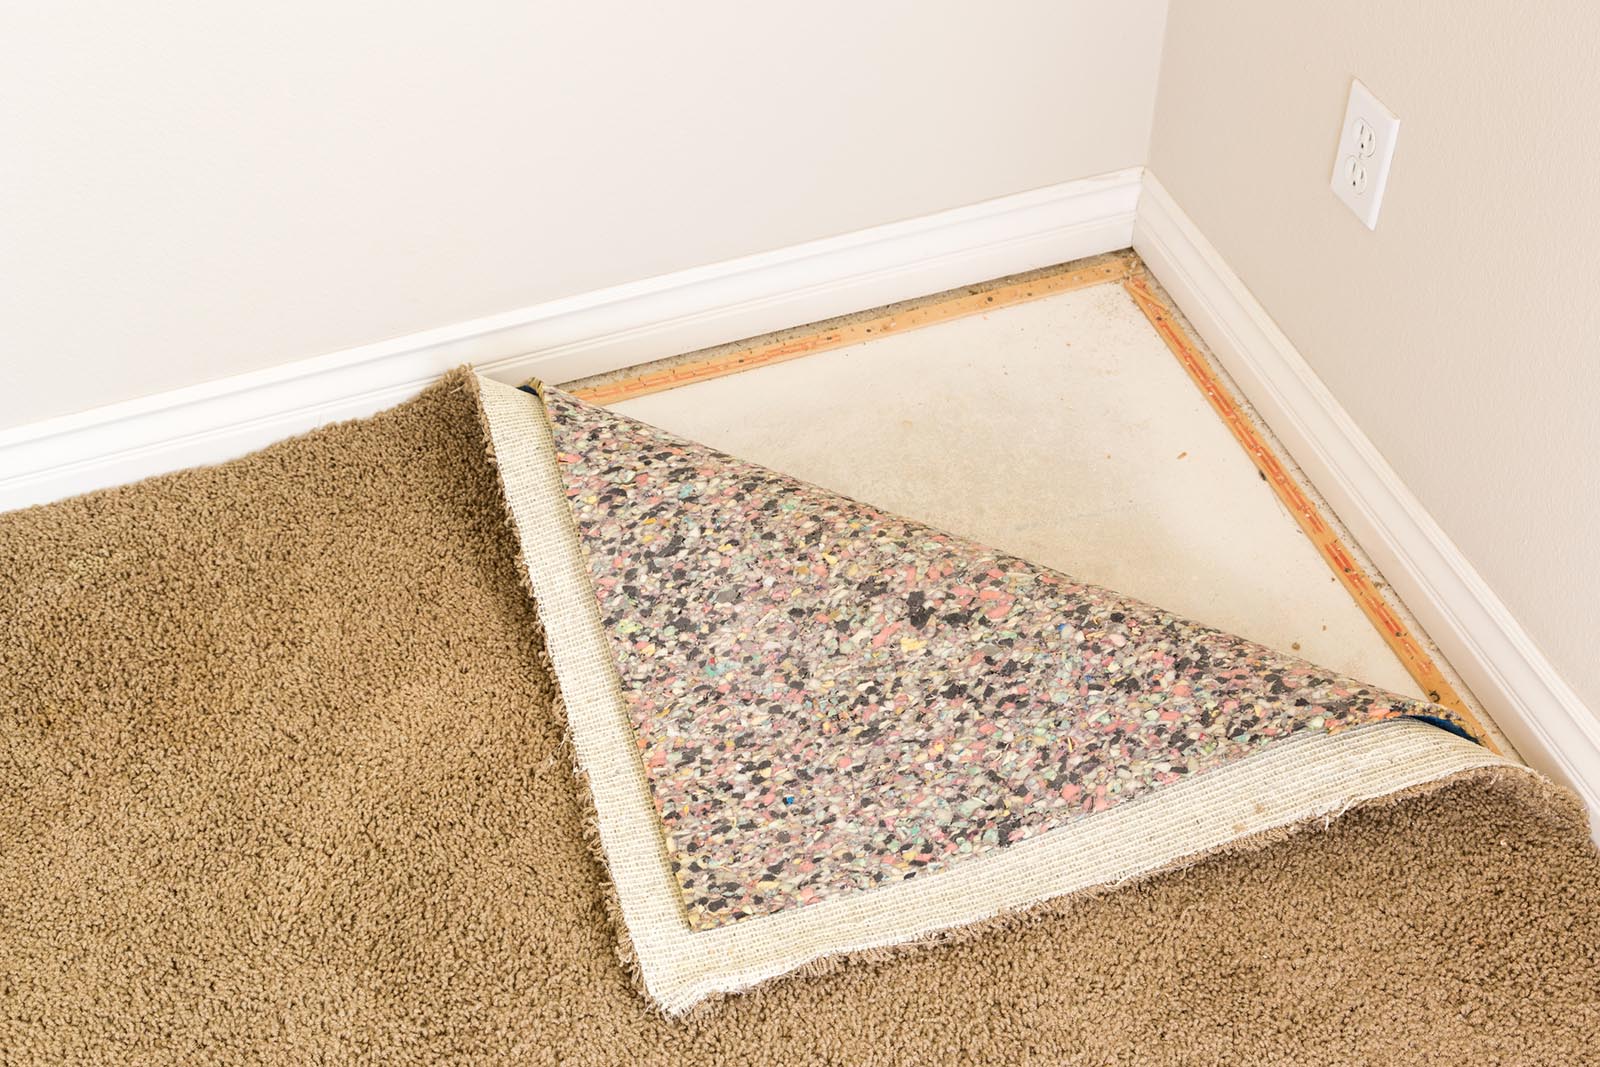 Pulled Back Carpet Flooring and Padding In Room